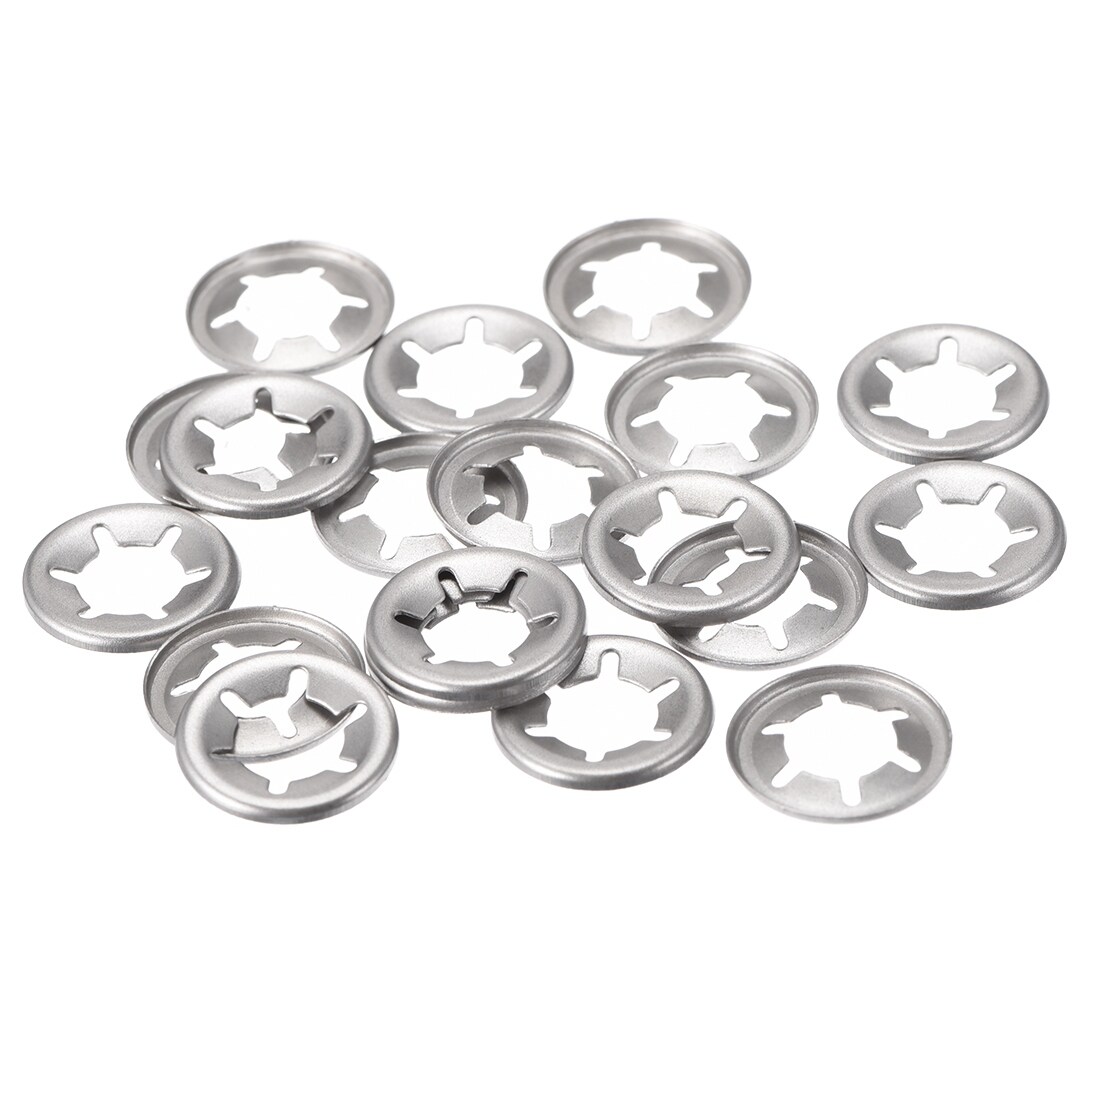 PACK OF 50 NEW 3/16" INTERNAL EXTERNAL TOOTH STAR LOCK WASHERS 